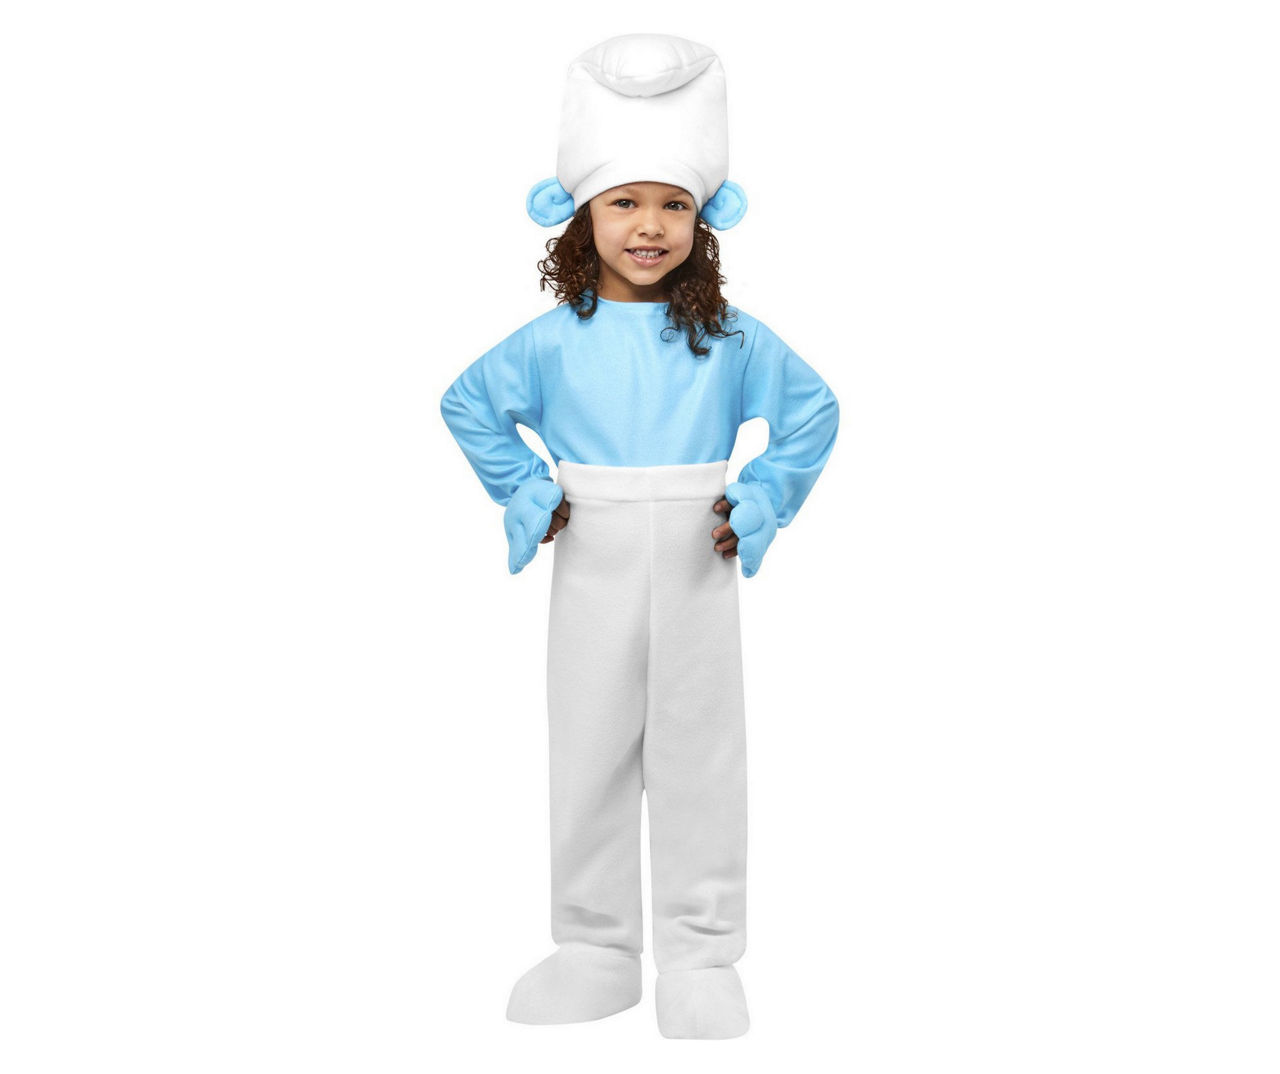 Toddler Size 2T The Smurfs Smurf Costume